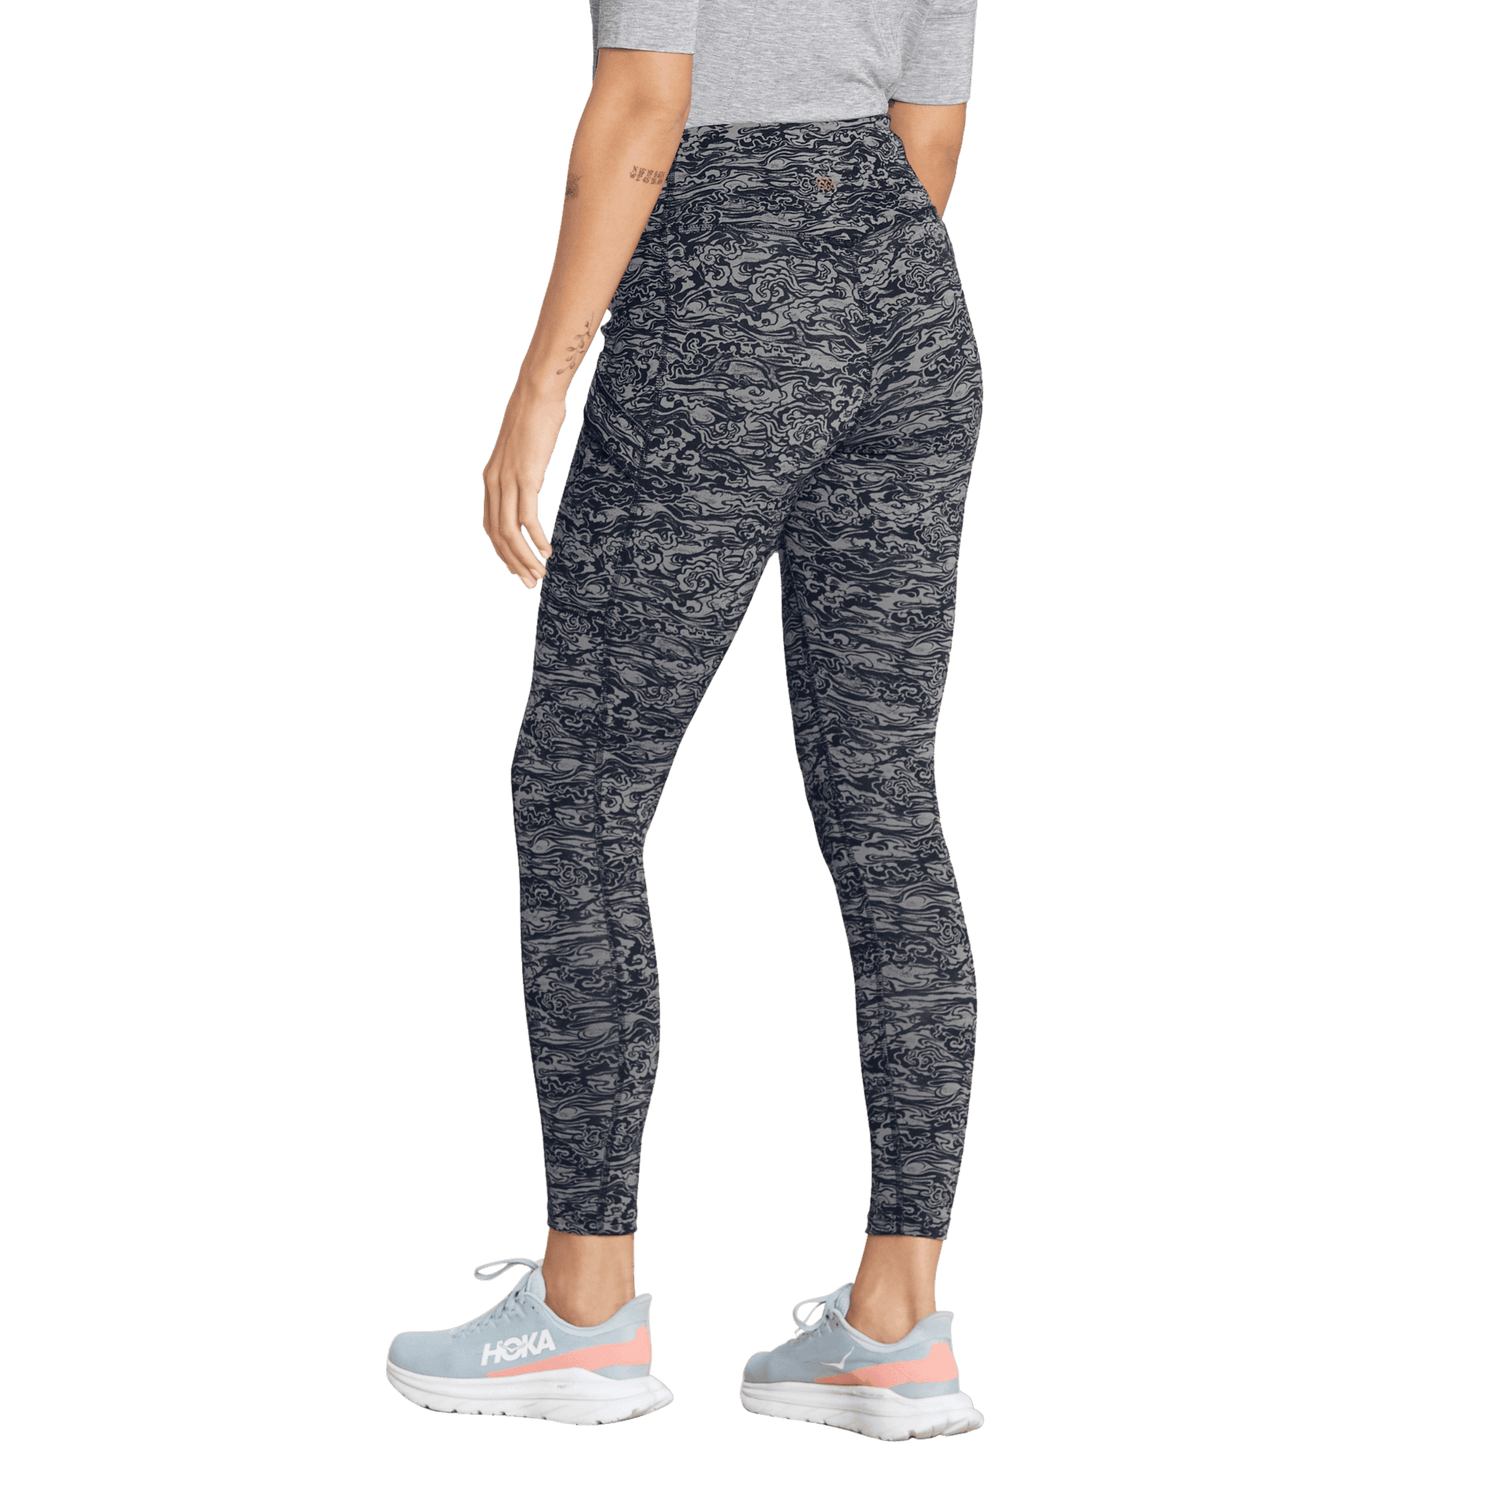 Sherpa - W's Nisha Tight - Recycled polyester - Weekendbee - sustainable sportswear